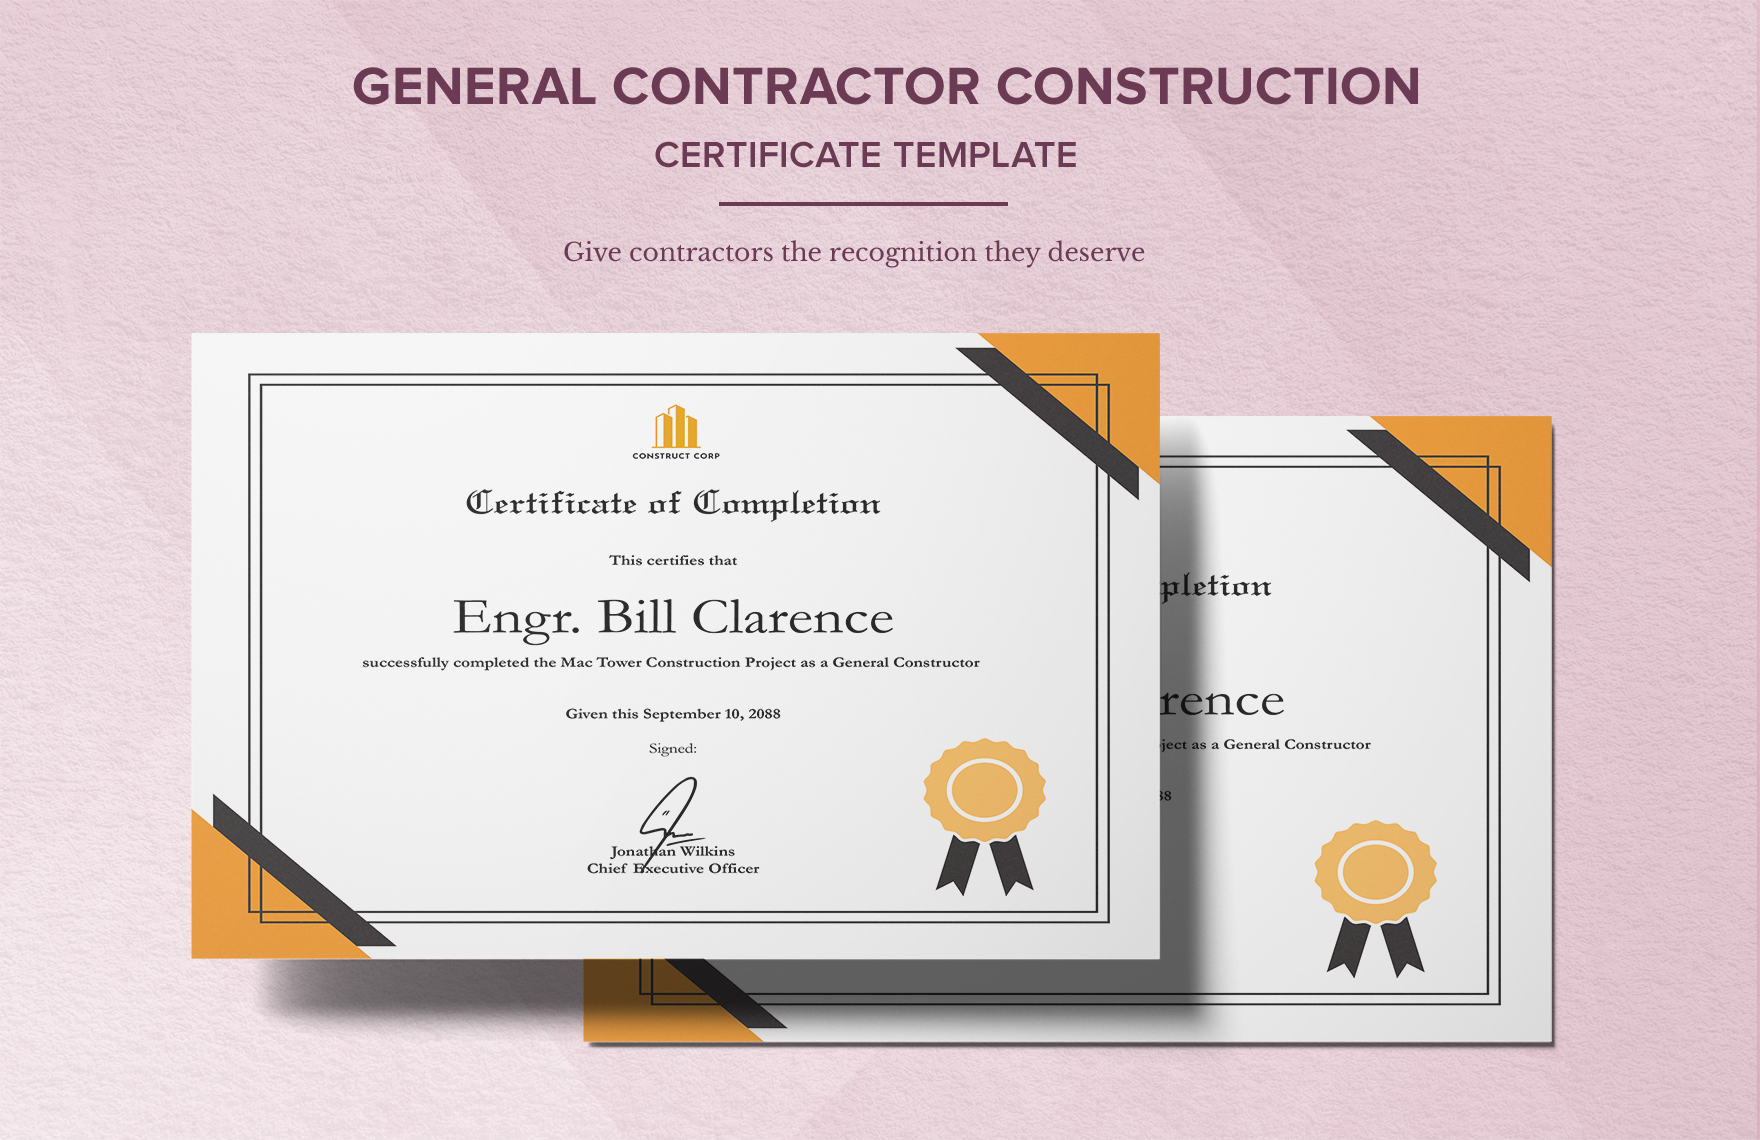 General Contractor Construction Certificate Template